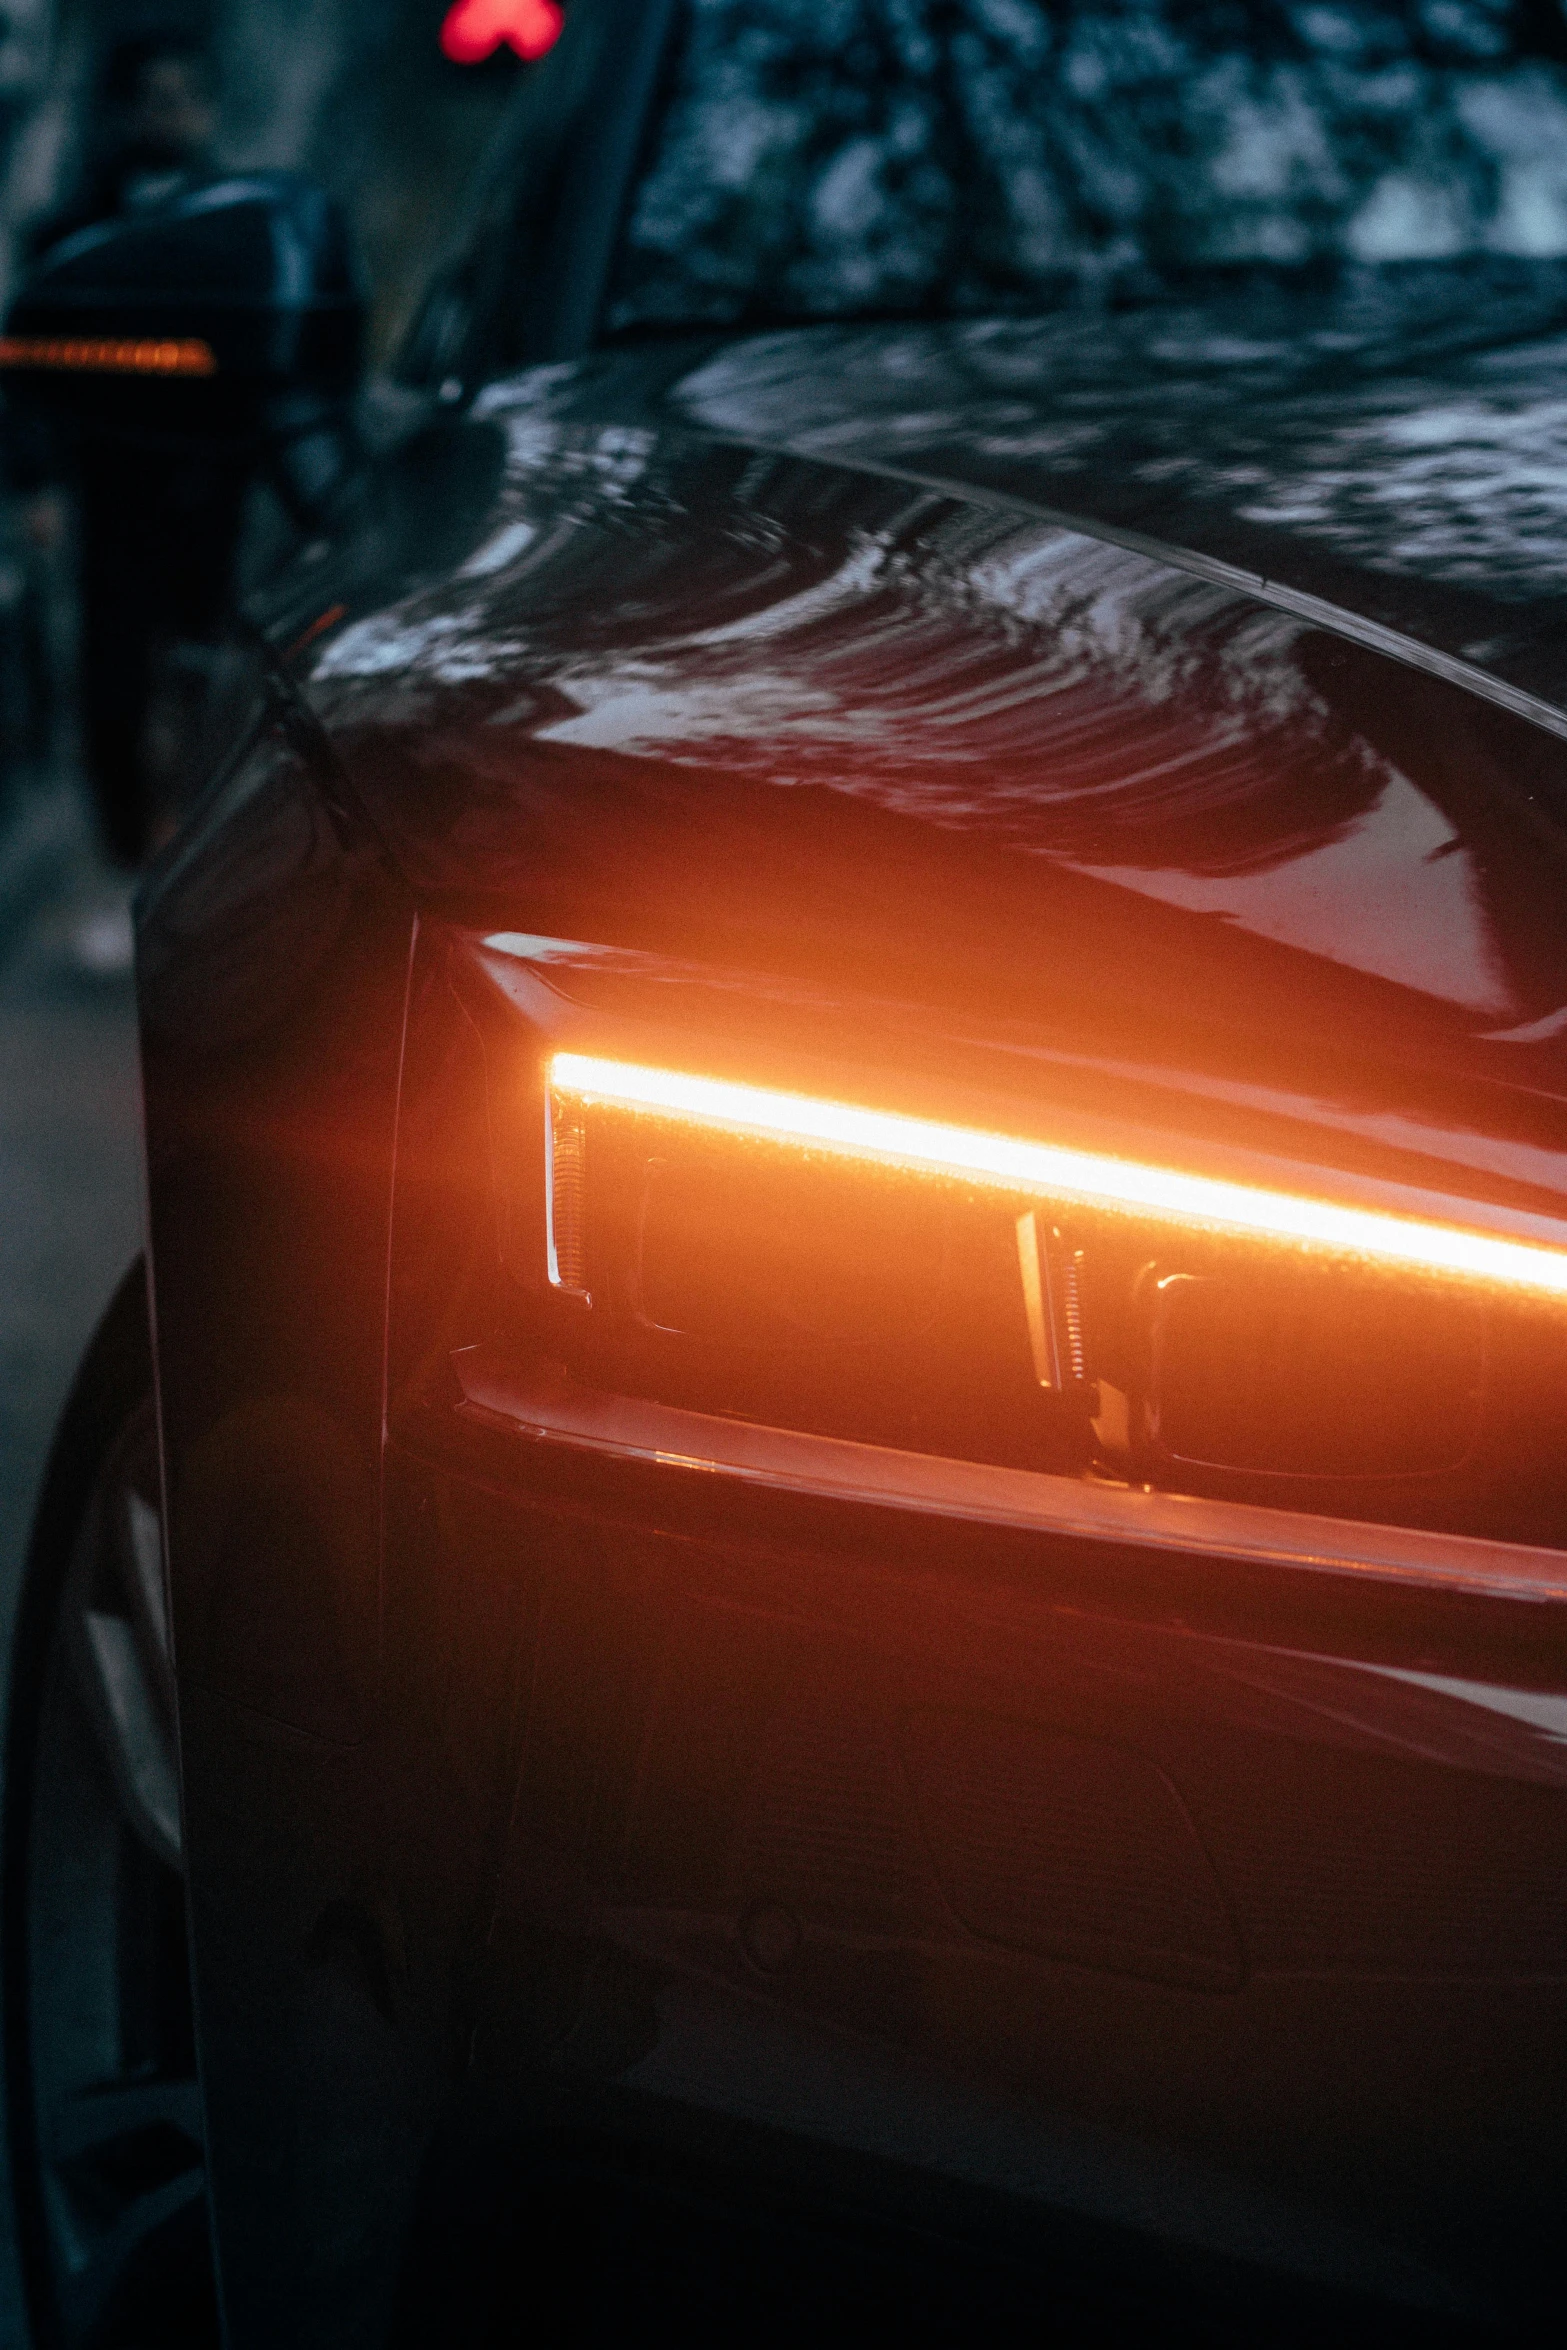 an automobile's tail light is pictured in the background